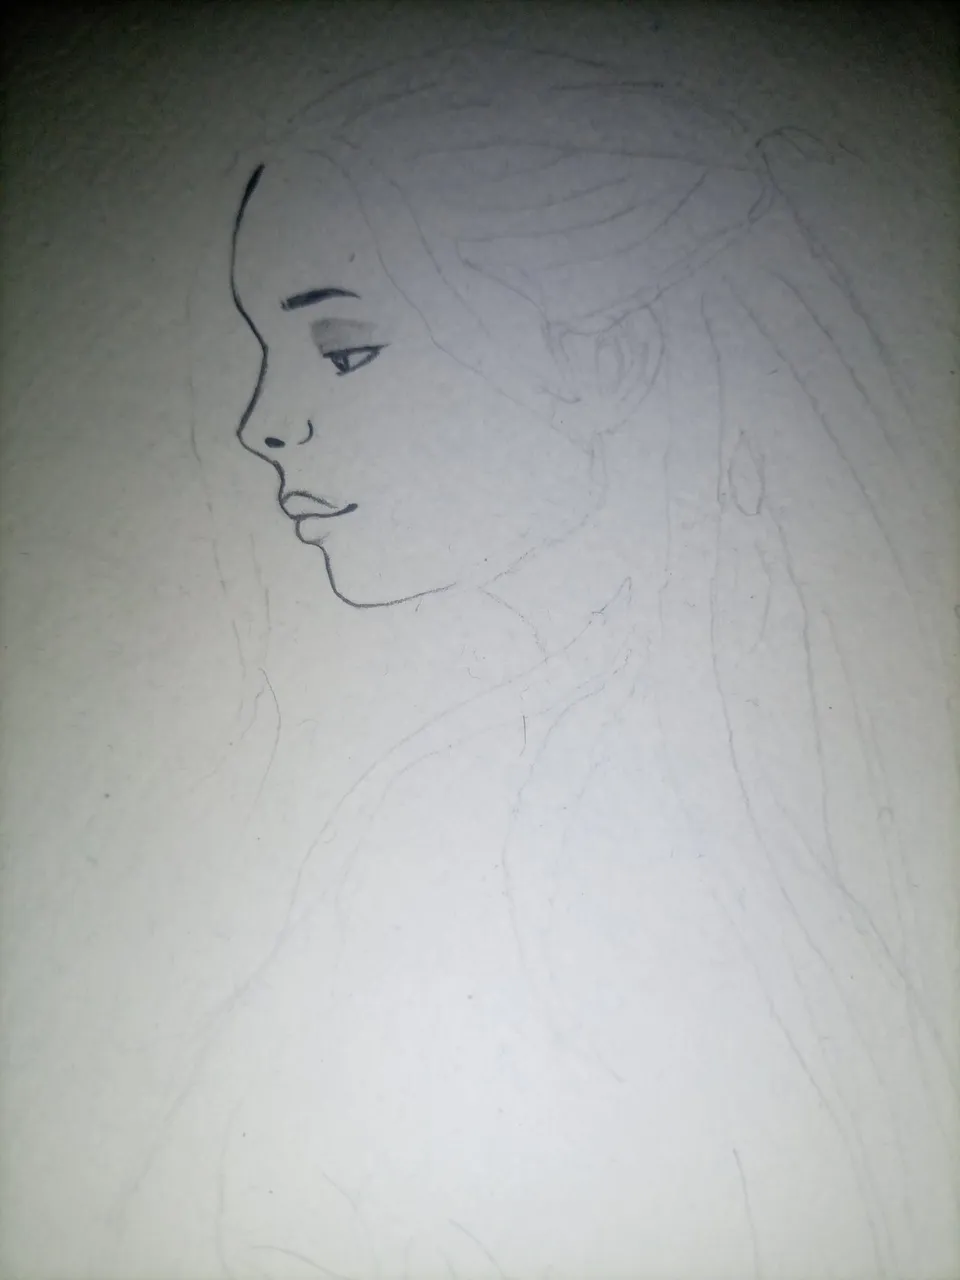 I m not good when it comes to drawing girls. So recently I started